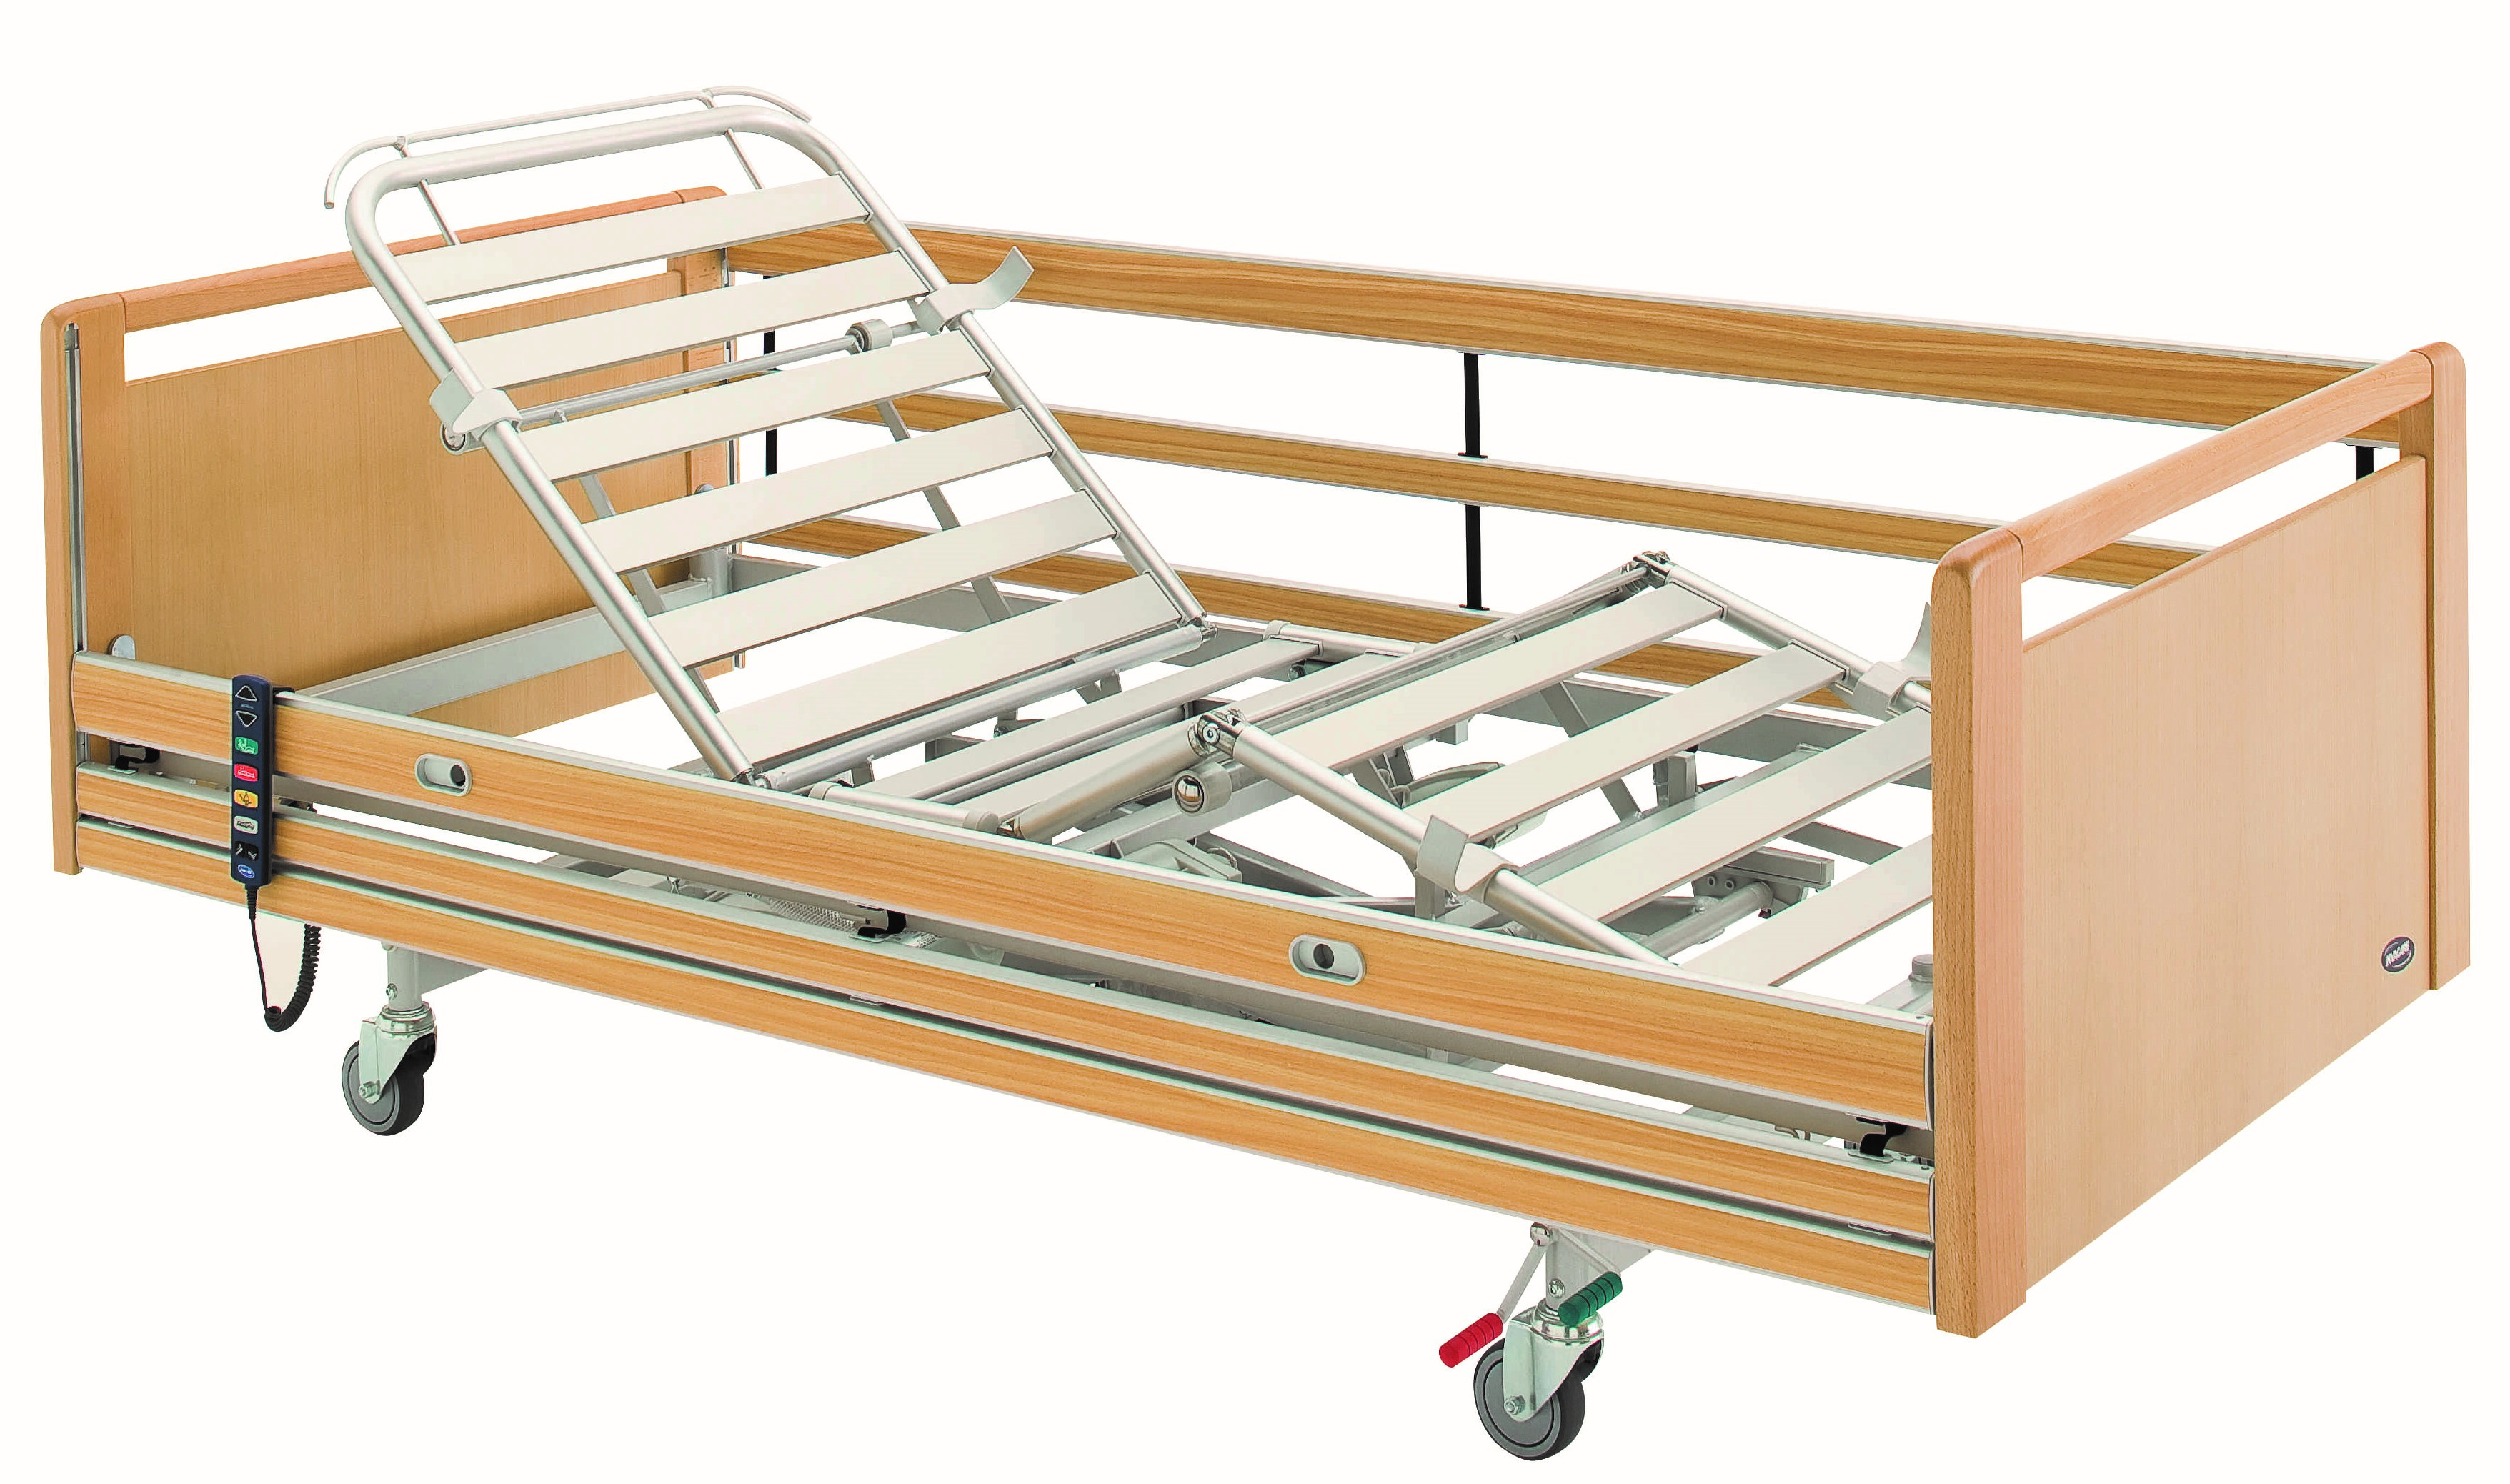 Contact Homecare Medical today and see how you can rent this bariatric profiling bed